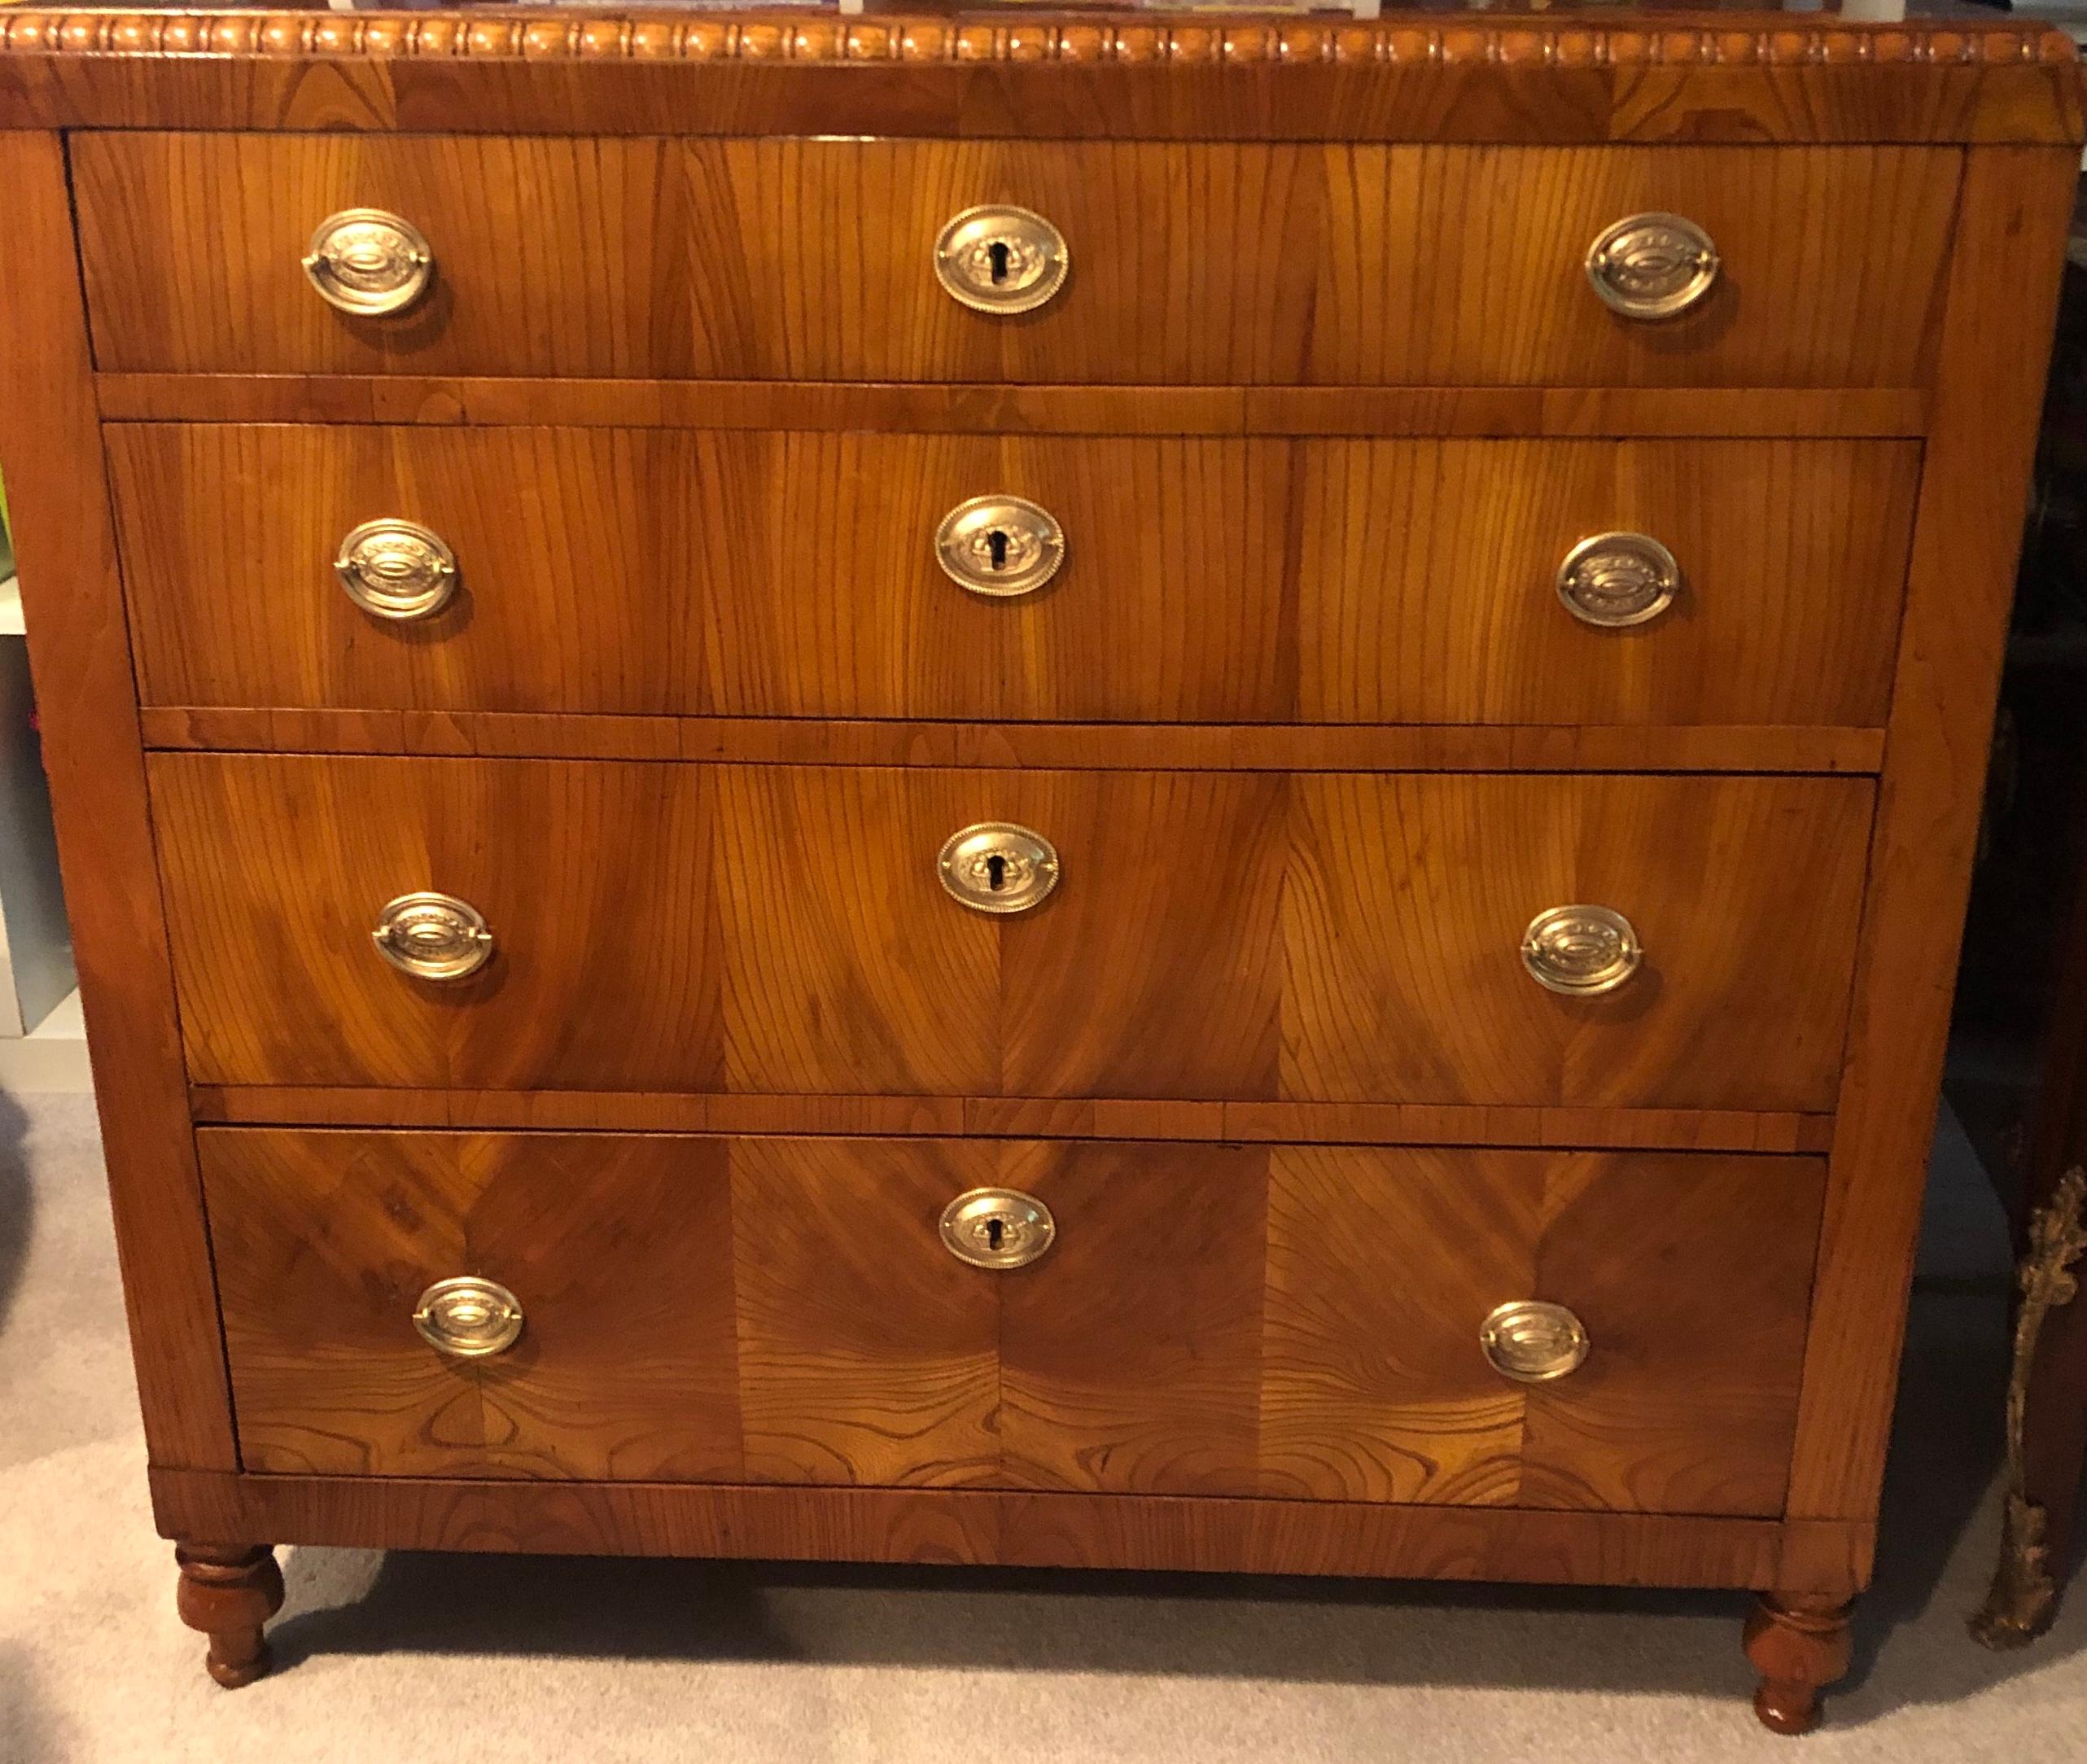 Elegant Karl Johan chest of drawers, Sweden 1830, mirrored elm wood veneer with original brass fittings. The four-drawer commode is decorated with a pearl frieze on the border of its top. It is in very good refinished condition, French polished.